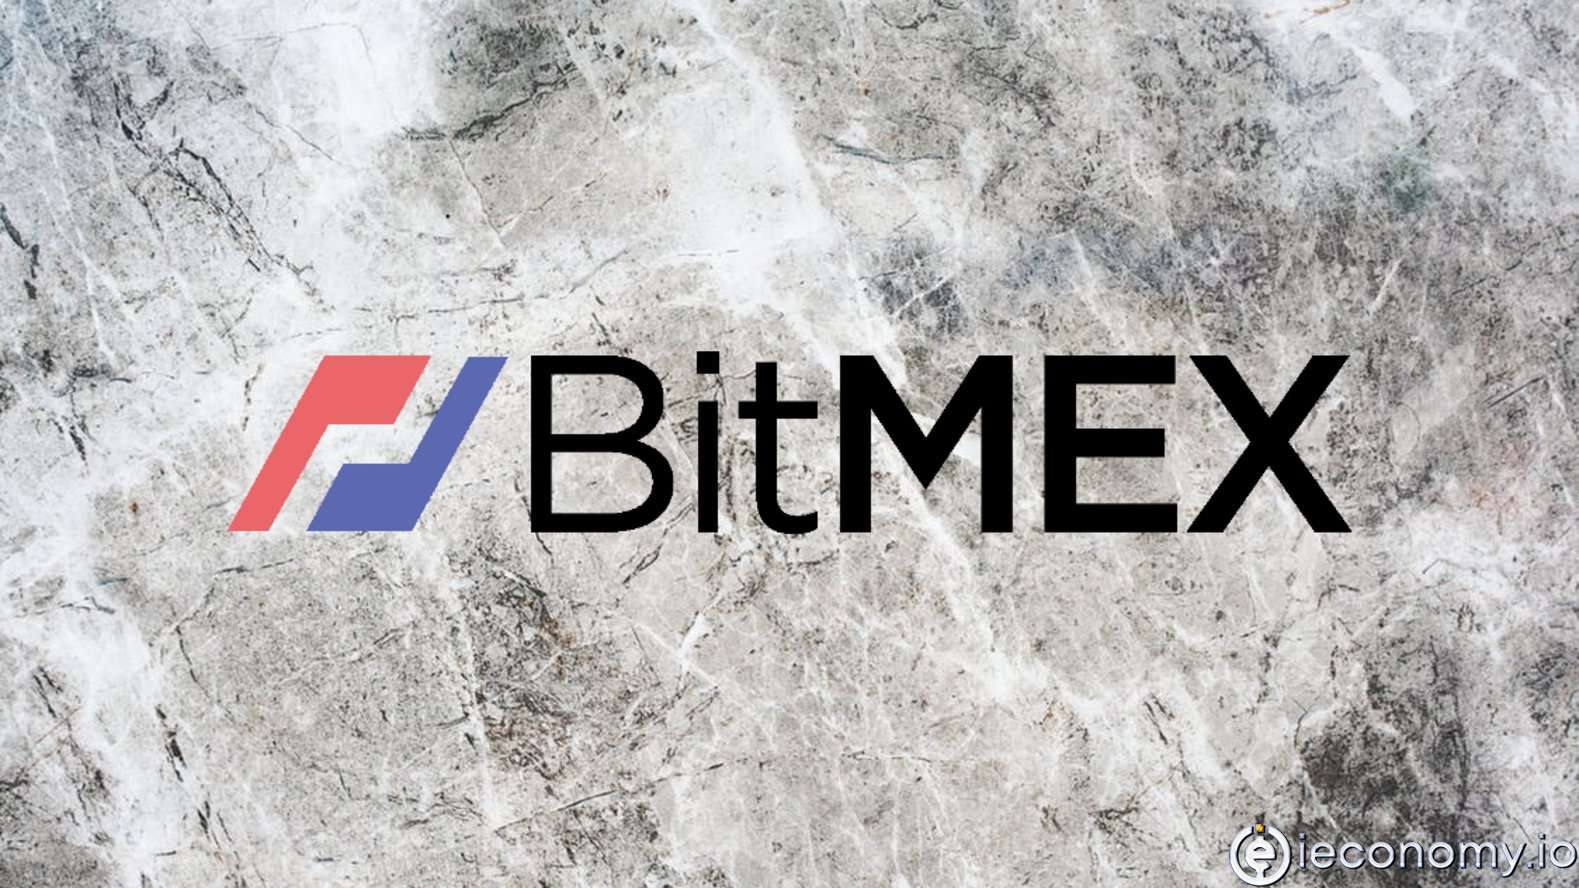 BitMex CEO Claims that 5 More Countries Will Switch to Bitcoin